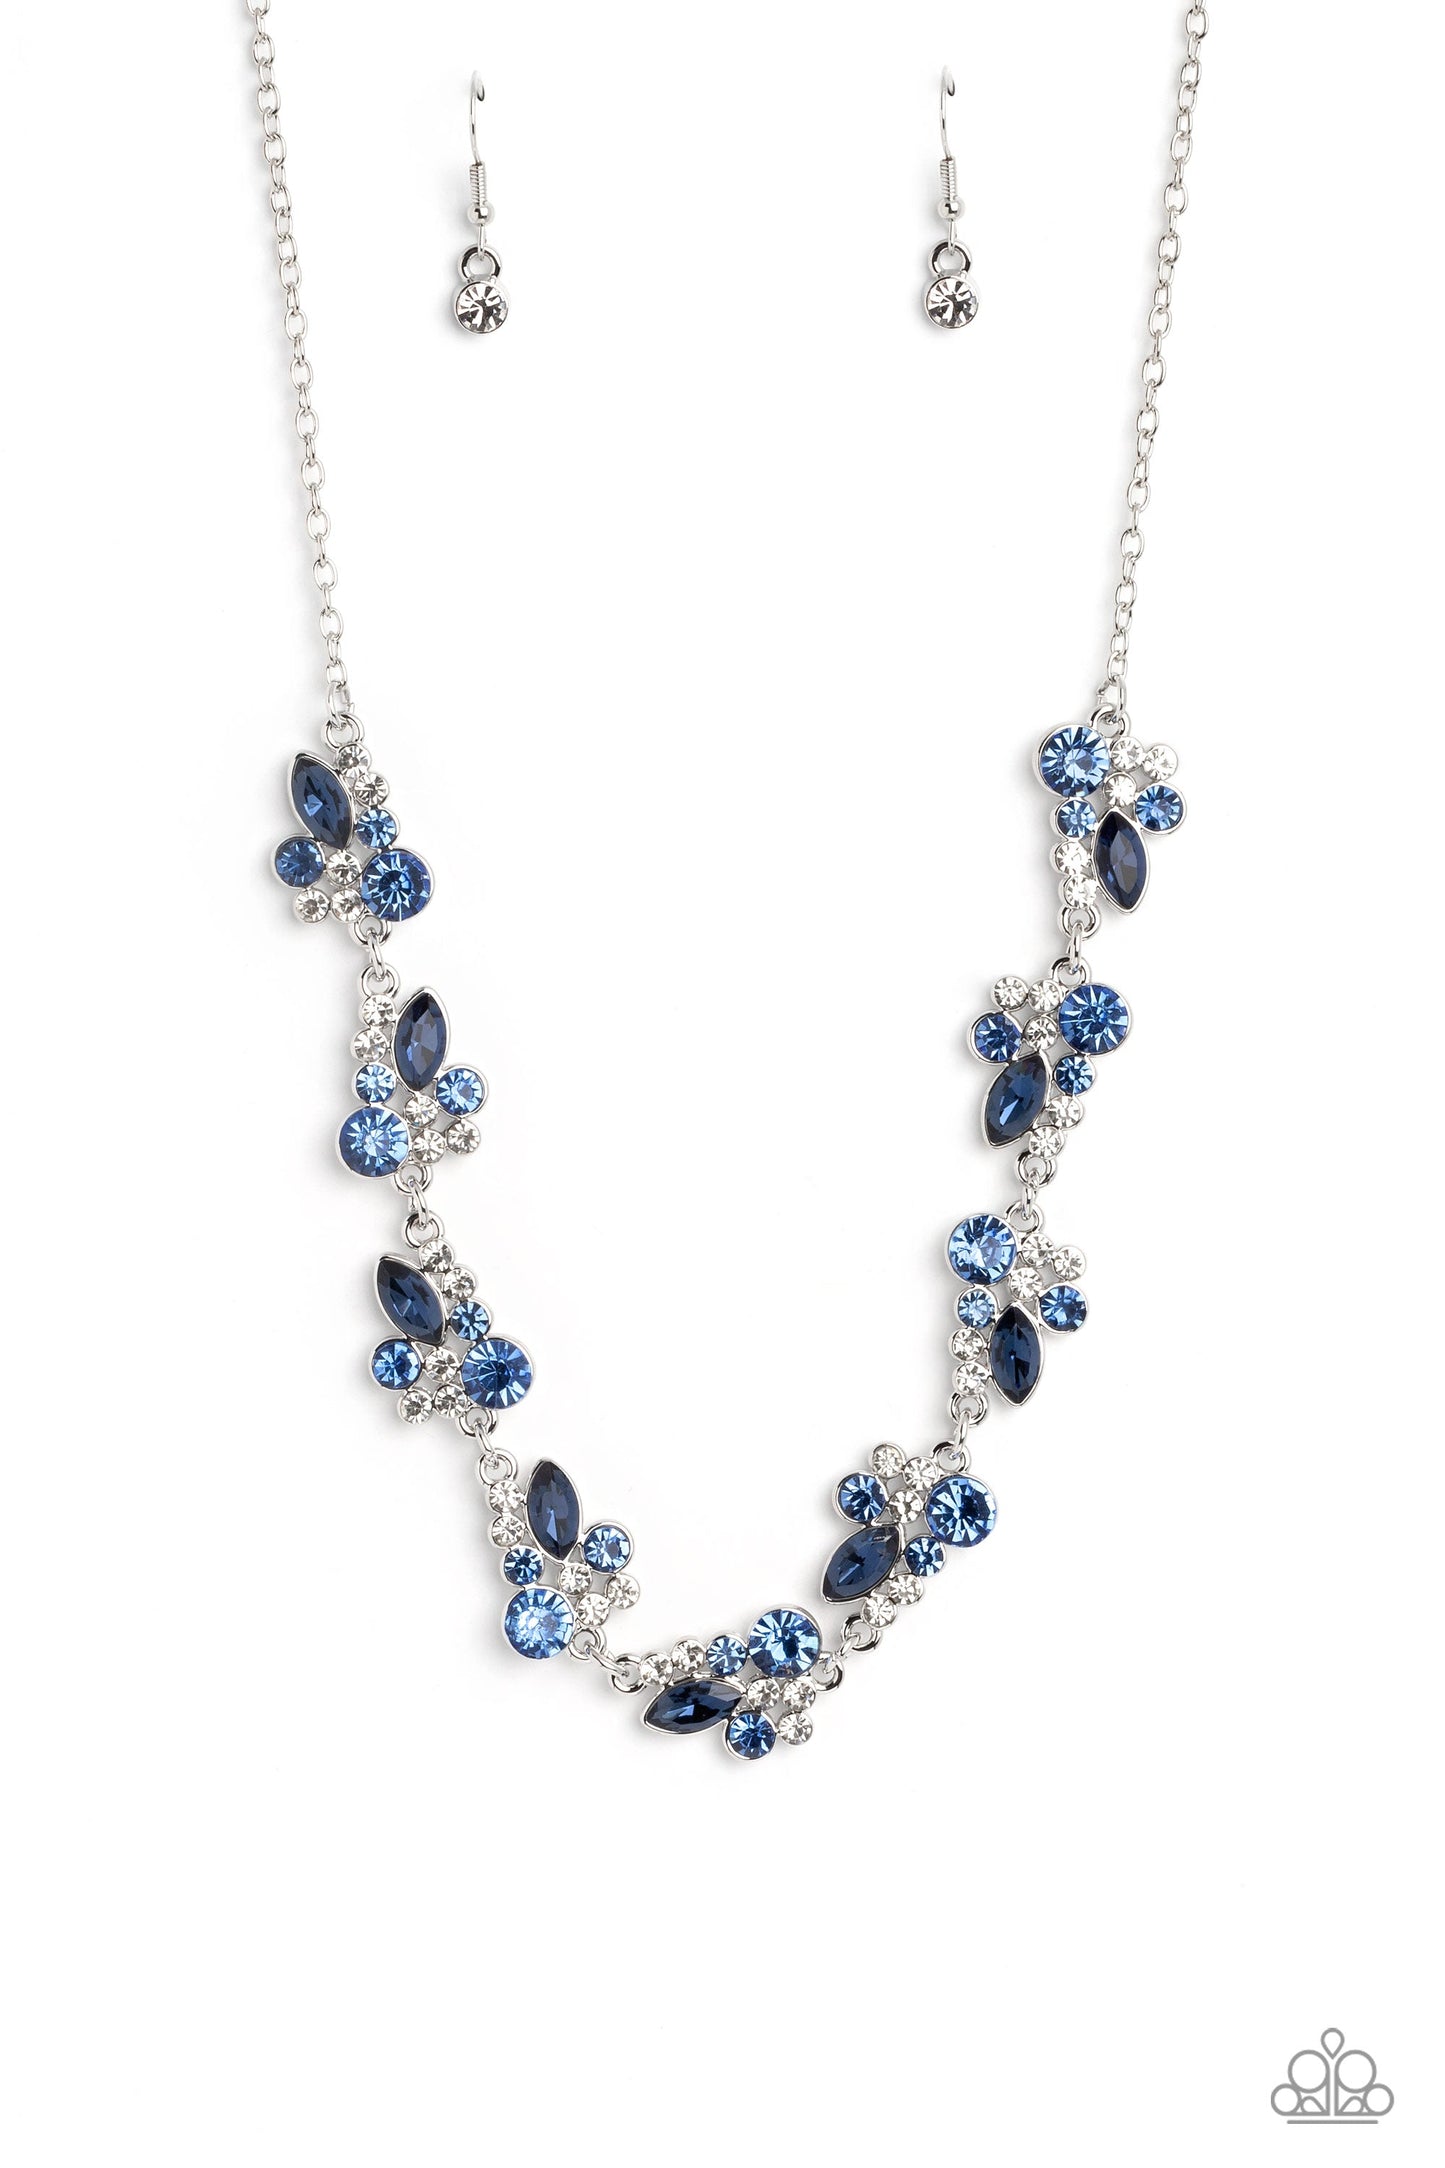 Swimming in Sparkles - Blue & White Rhinestone Clusters Paparazzi Necklace & matching earrings